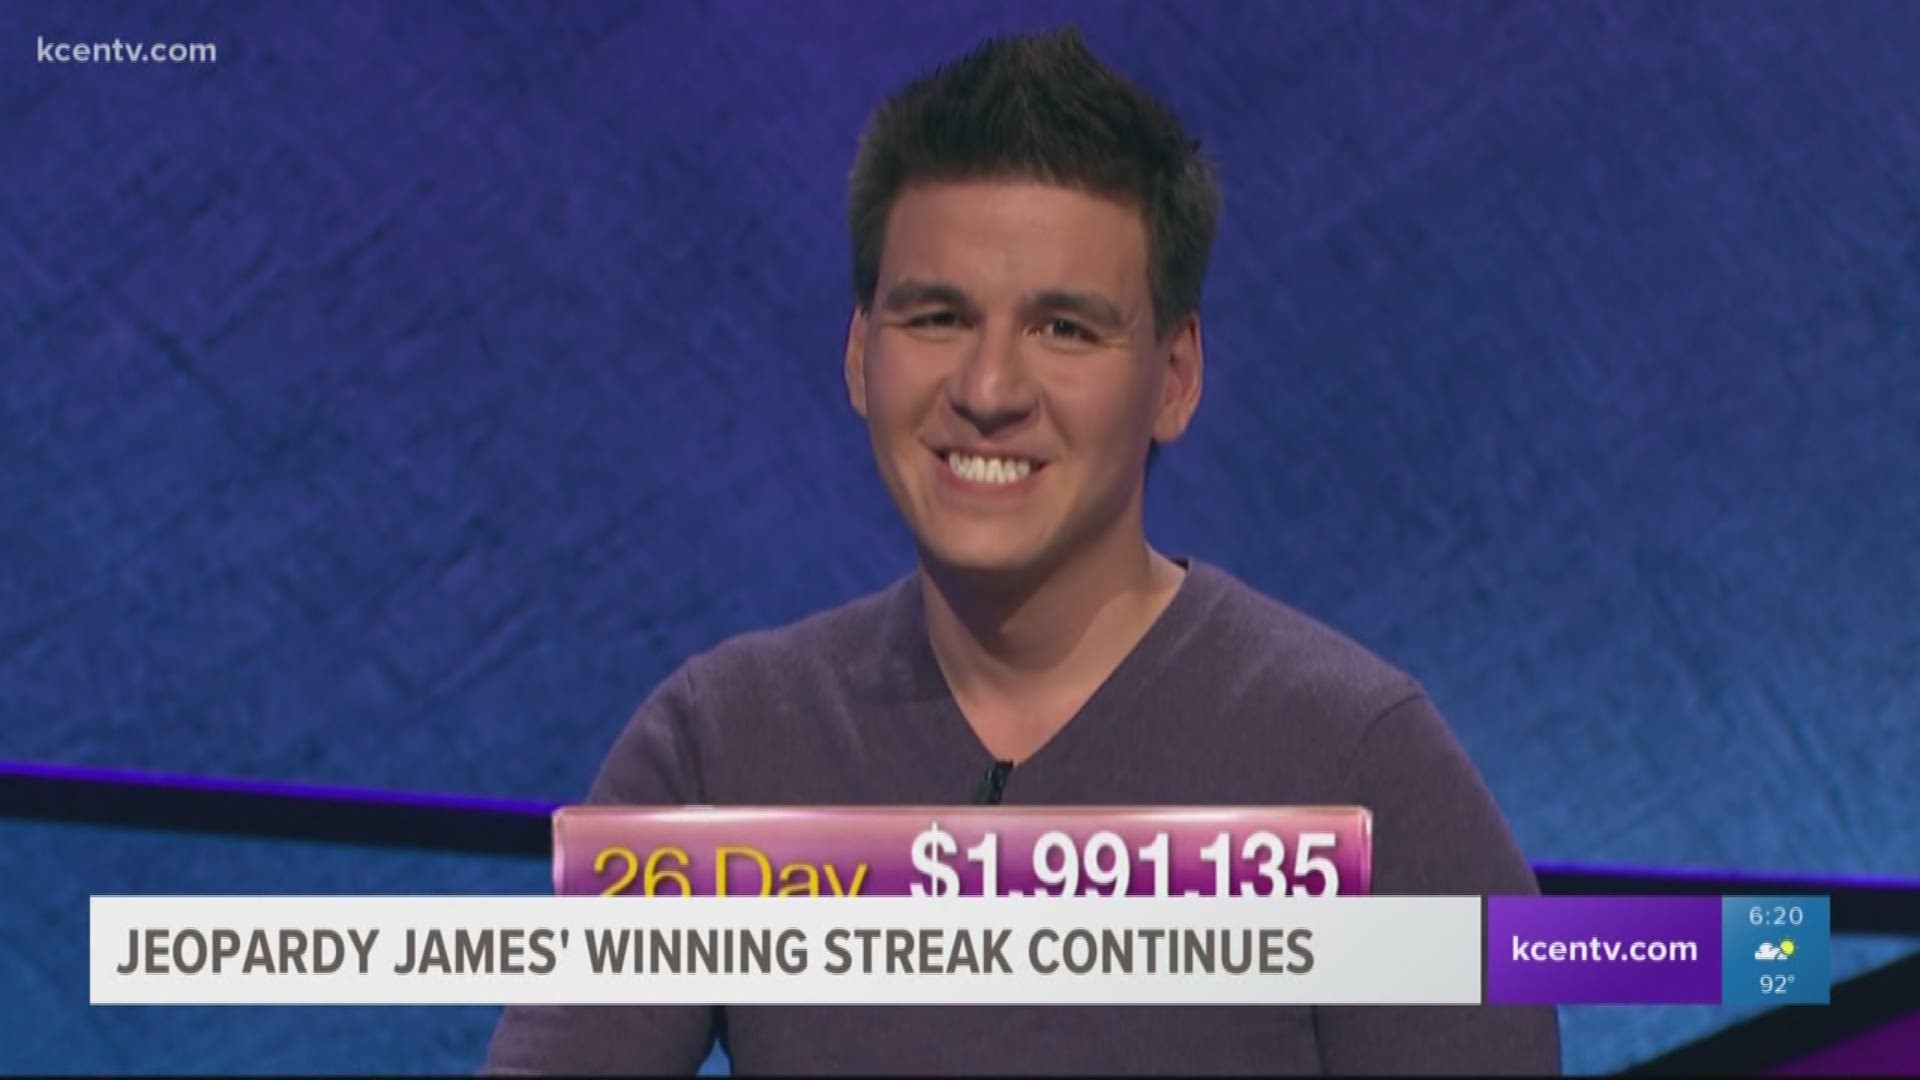 Through 26 days of 'Jeopardy!', James Holzauer has racked up $1,991,135.